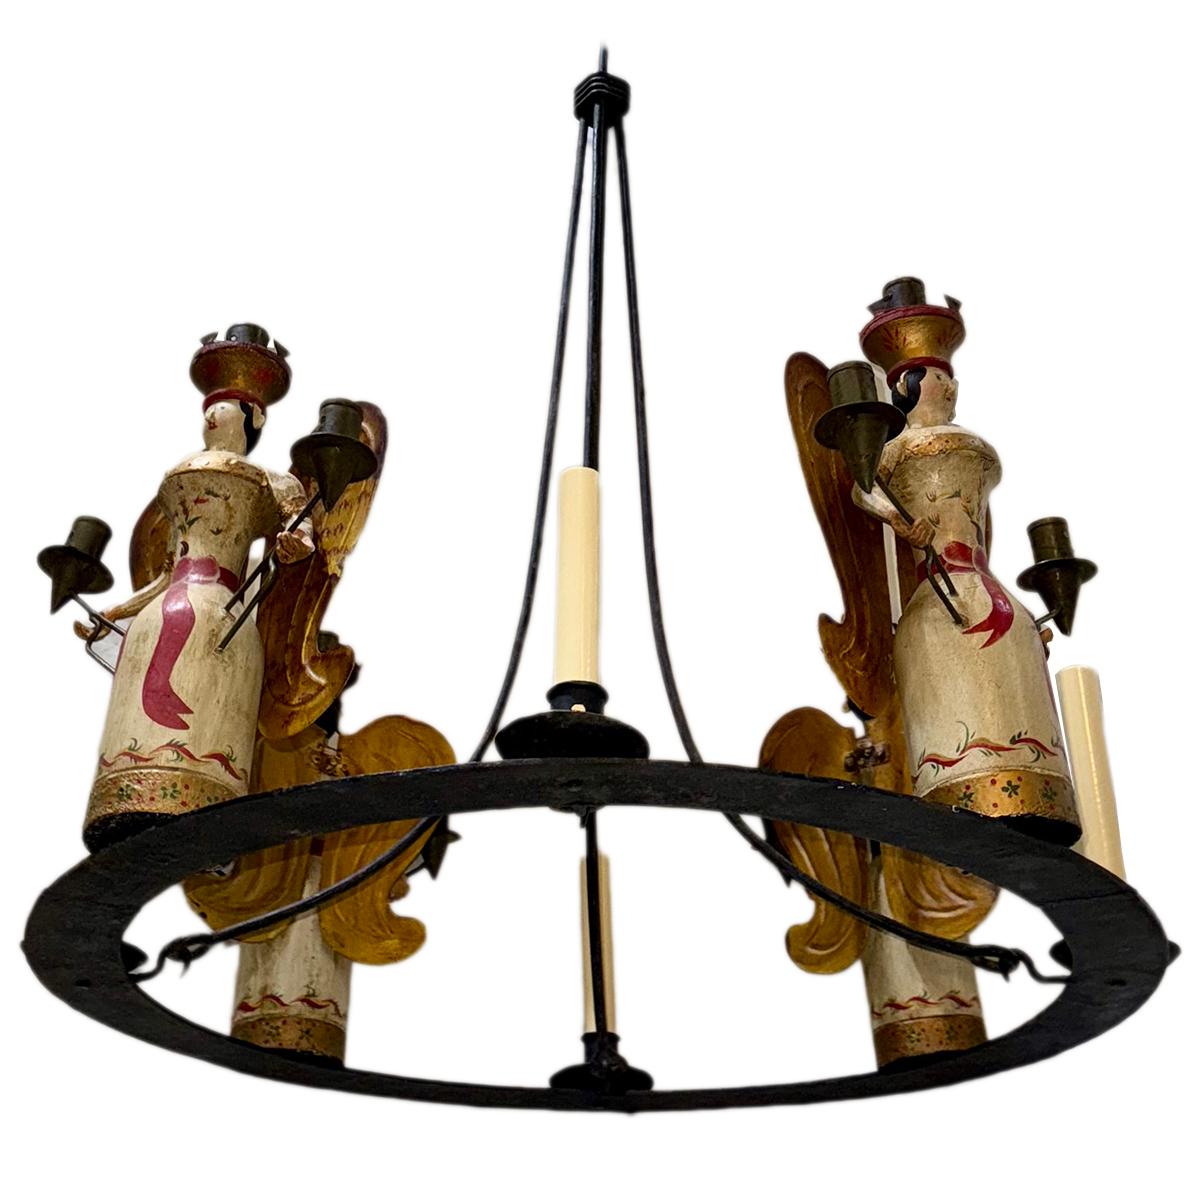 A circa 1940's Italian wrought iron chandelier with wooden angel candle holders.

Measurements:
Diameter: 28